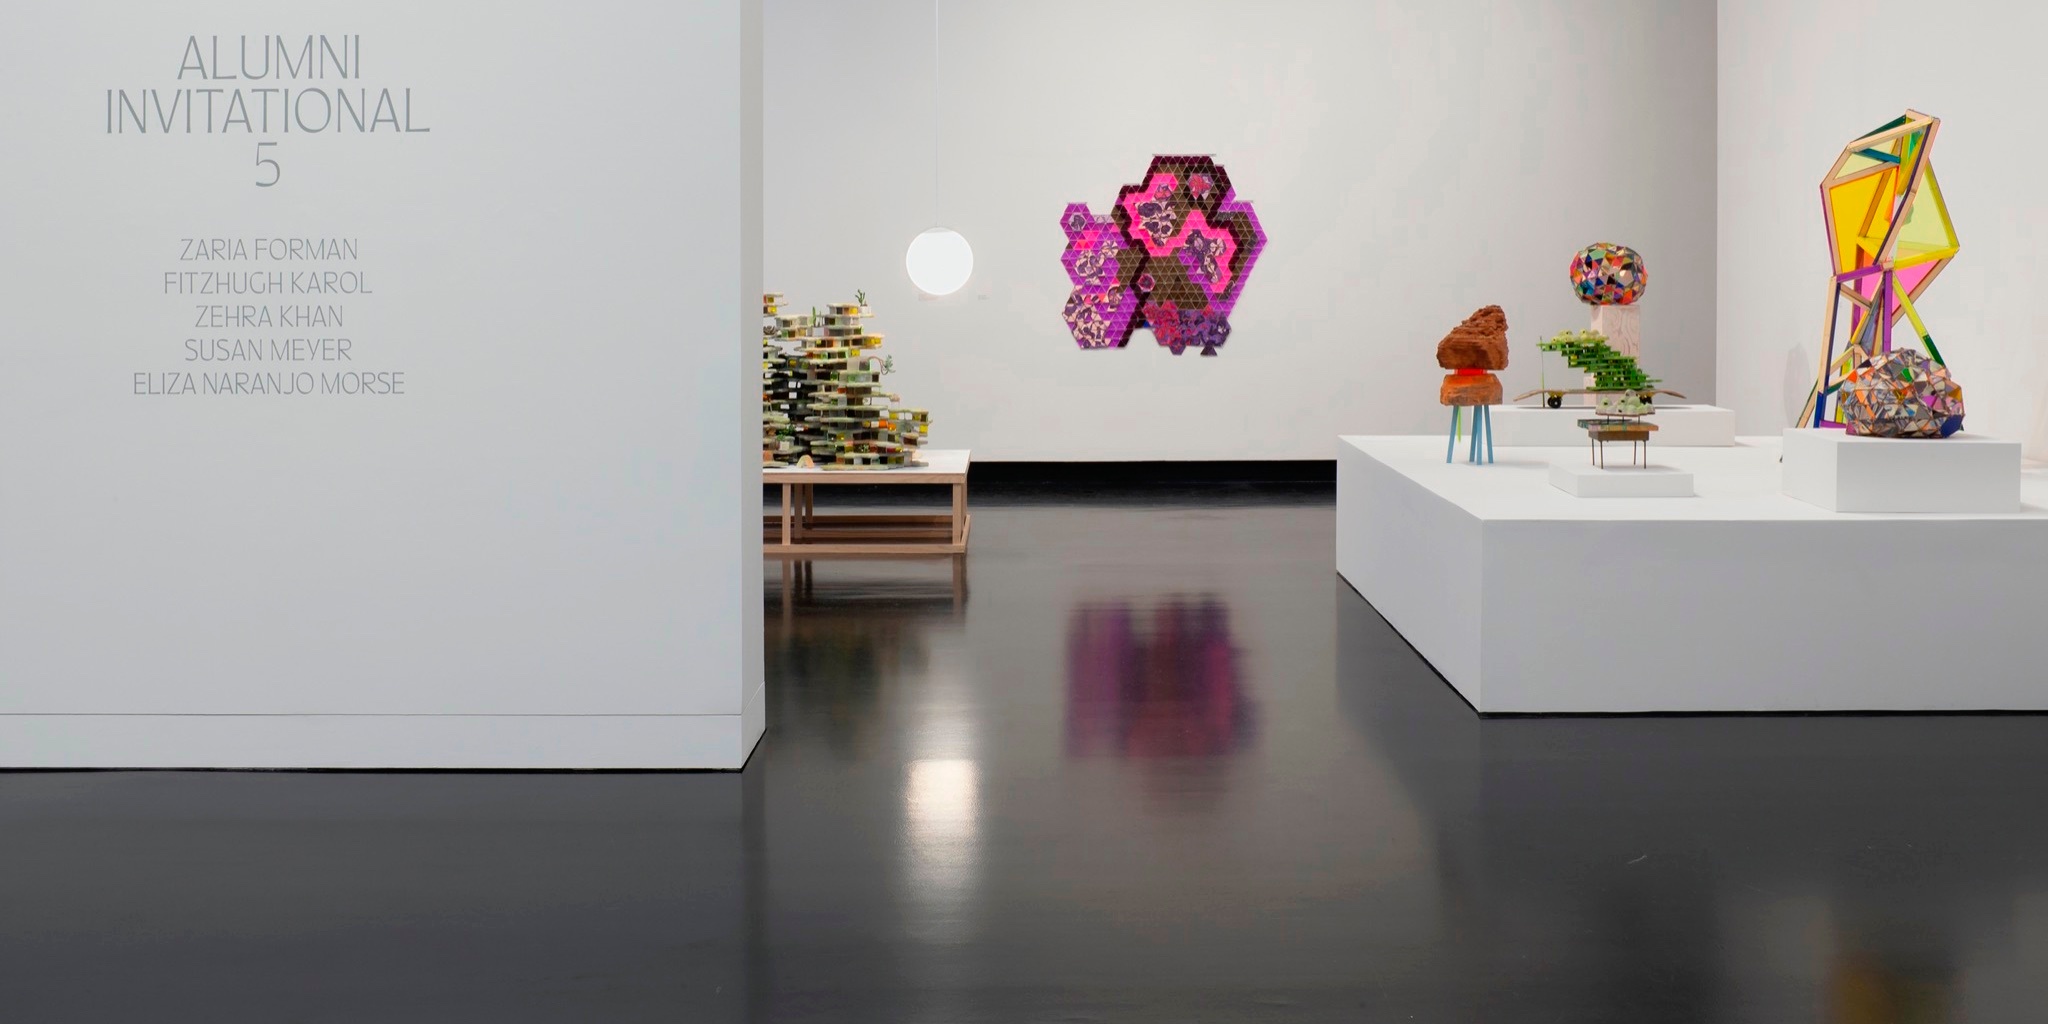 An interior of a museum gallery with one wall showing the title Alumni Invitational 5, with a number of colorful sculptures sitting on various plinths, and hung on the wall.